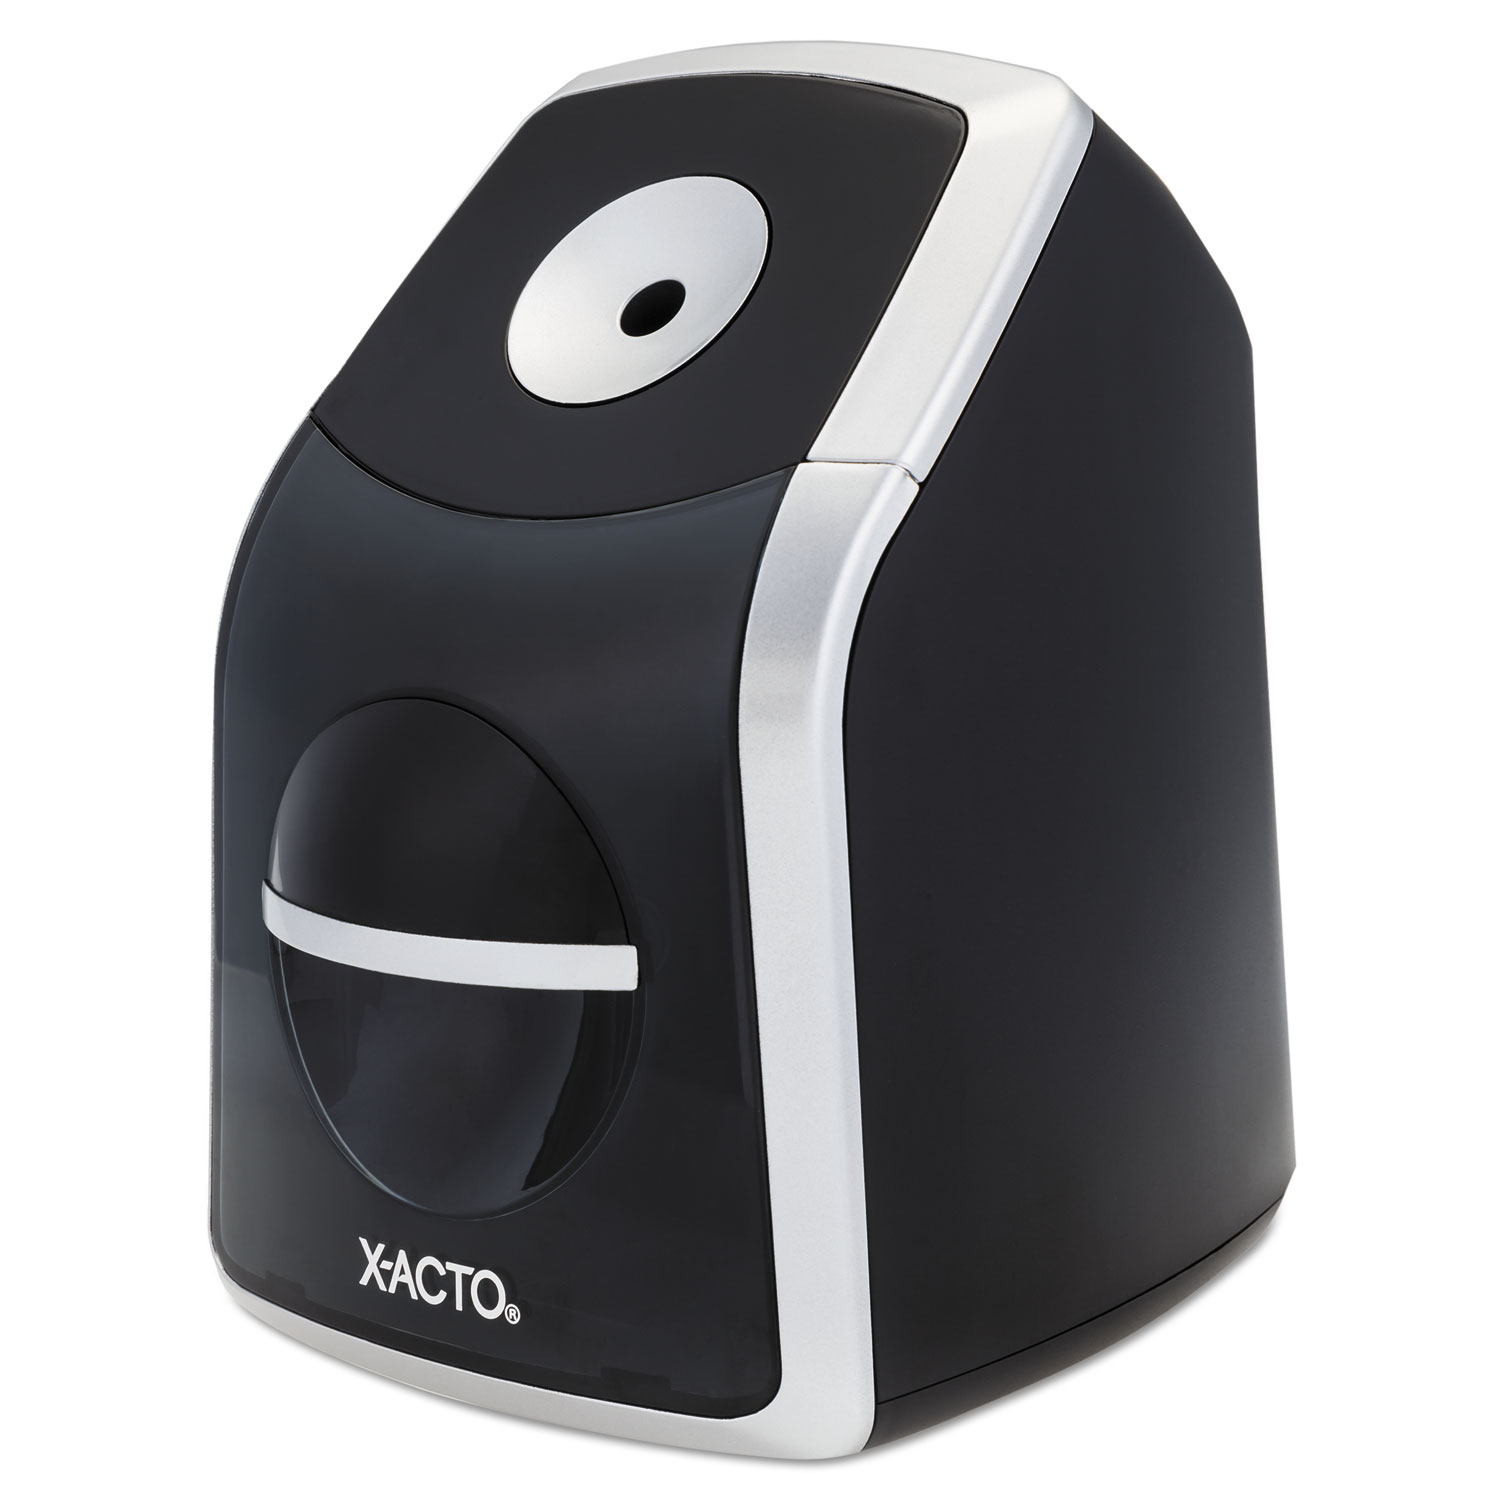  X-ACTO 1771LMR SharpX Classic Home Office Electric Pencil Sharpener, AC-Powered, 3 x 4 x 5.1, Black/Silver (EPI1771LMR) 